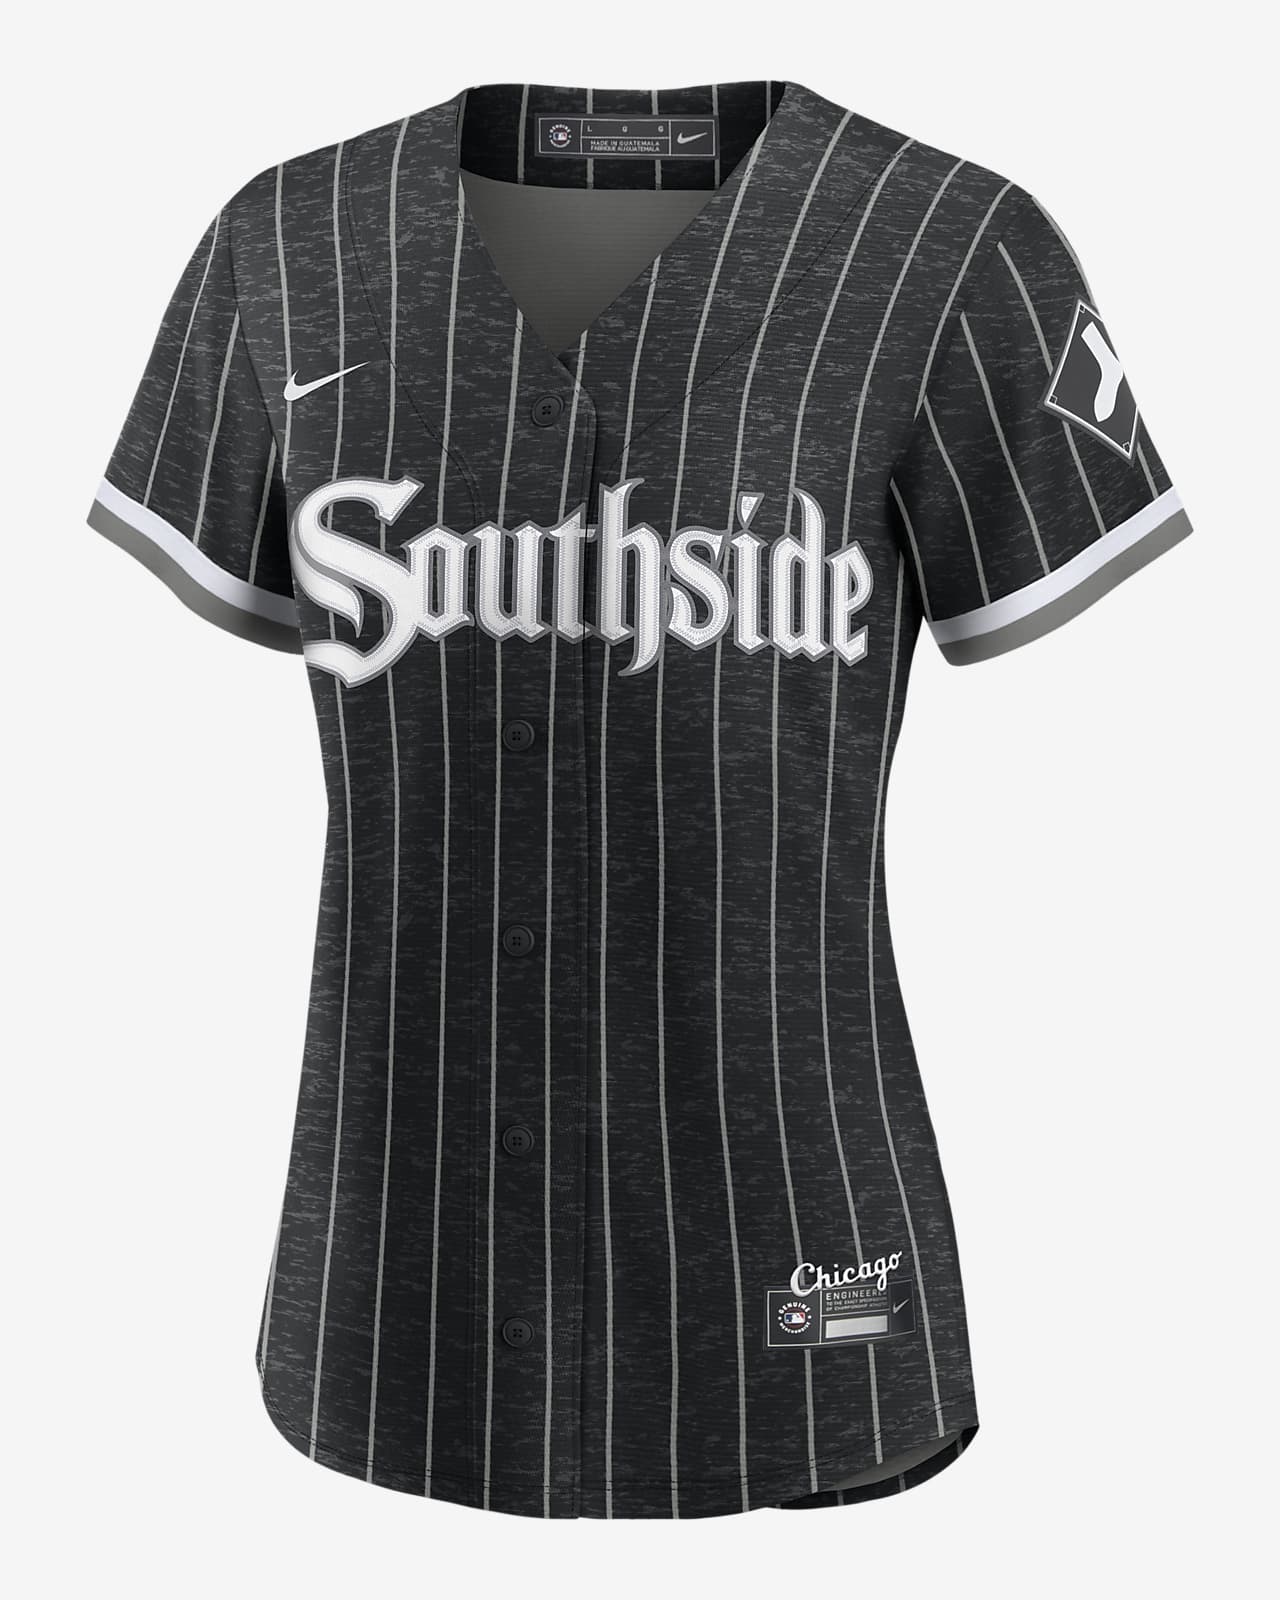 MLB Chicago White Sox City Connect (Tim Anderson) Women's Replica Baseball Jersey